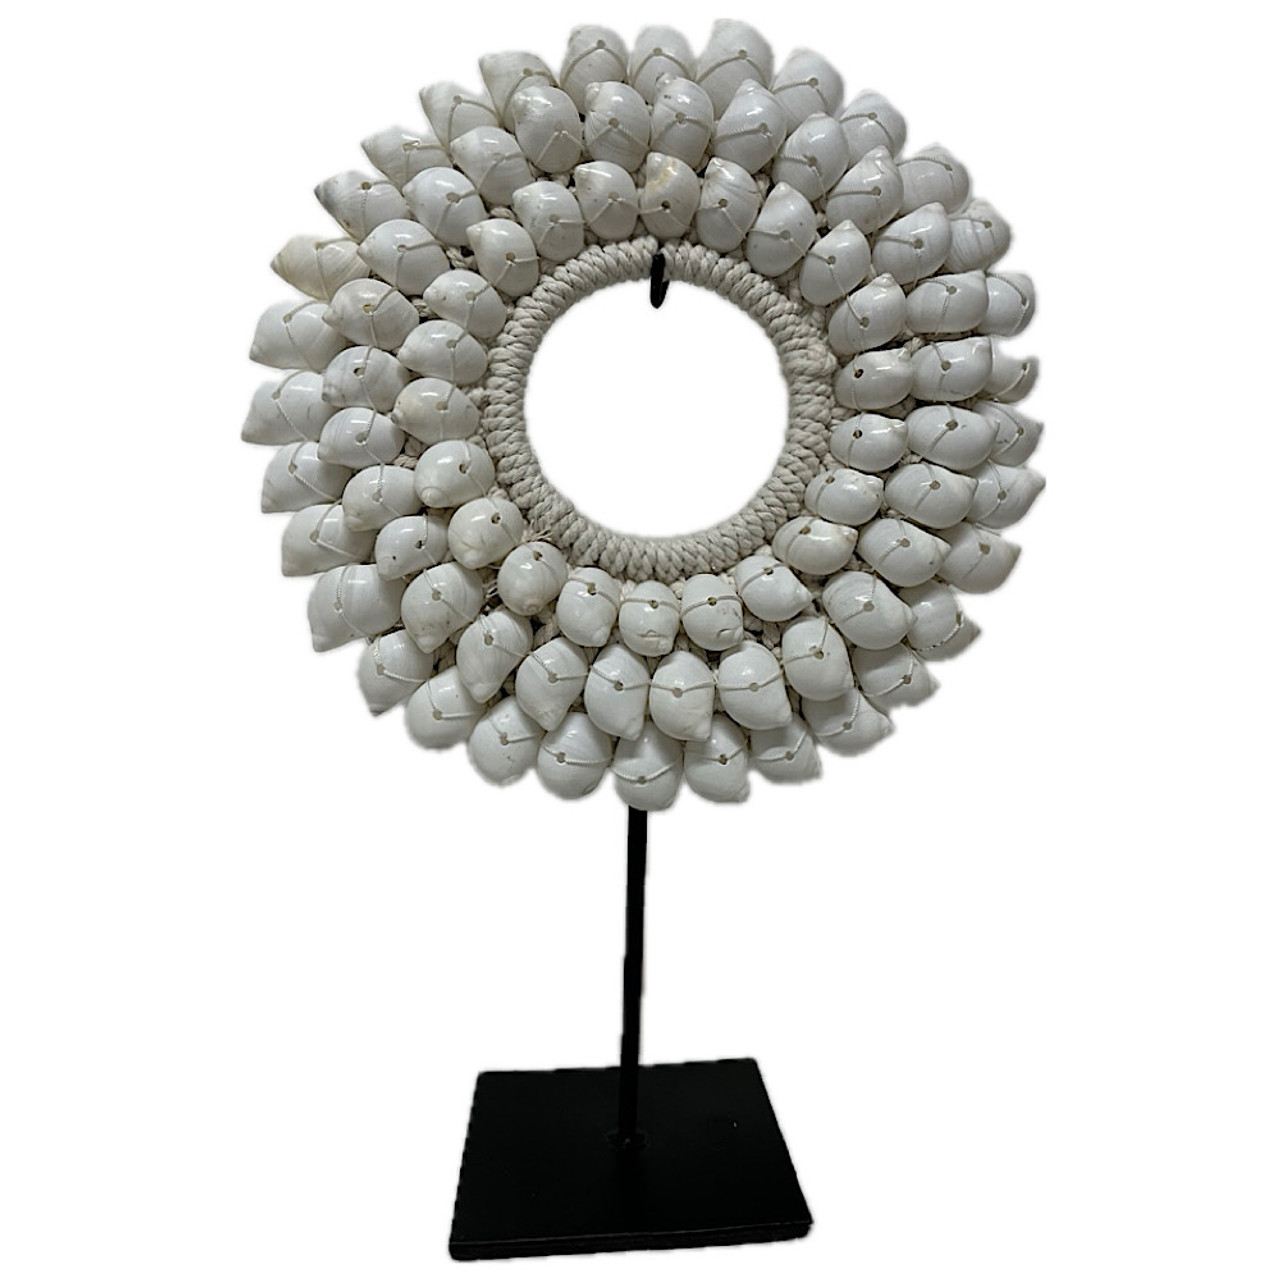 Home Decor white button shell  necklace on metal stand
35cm x 25cm